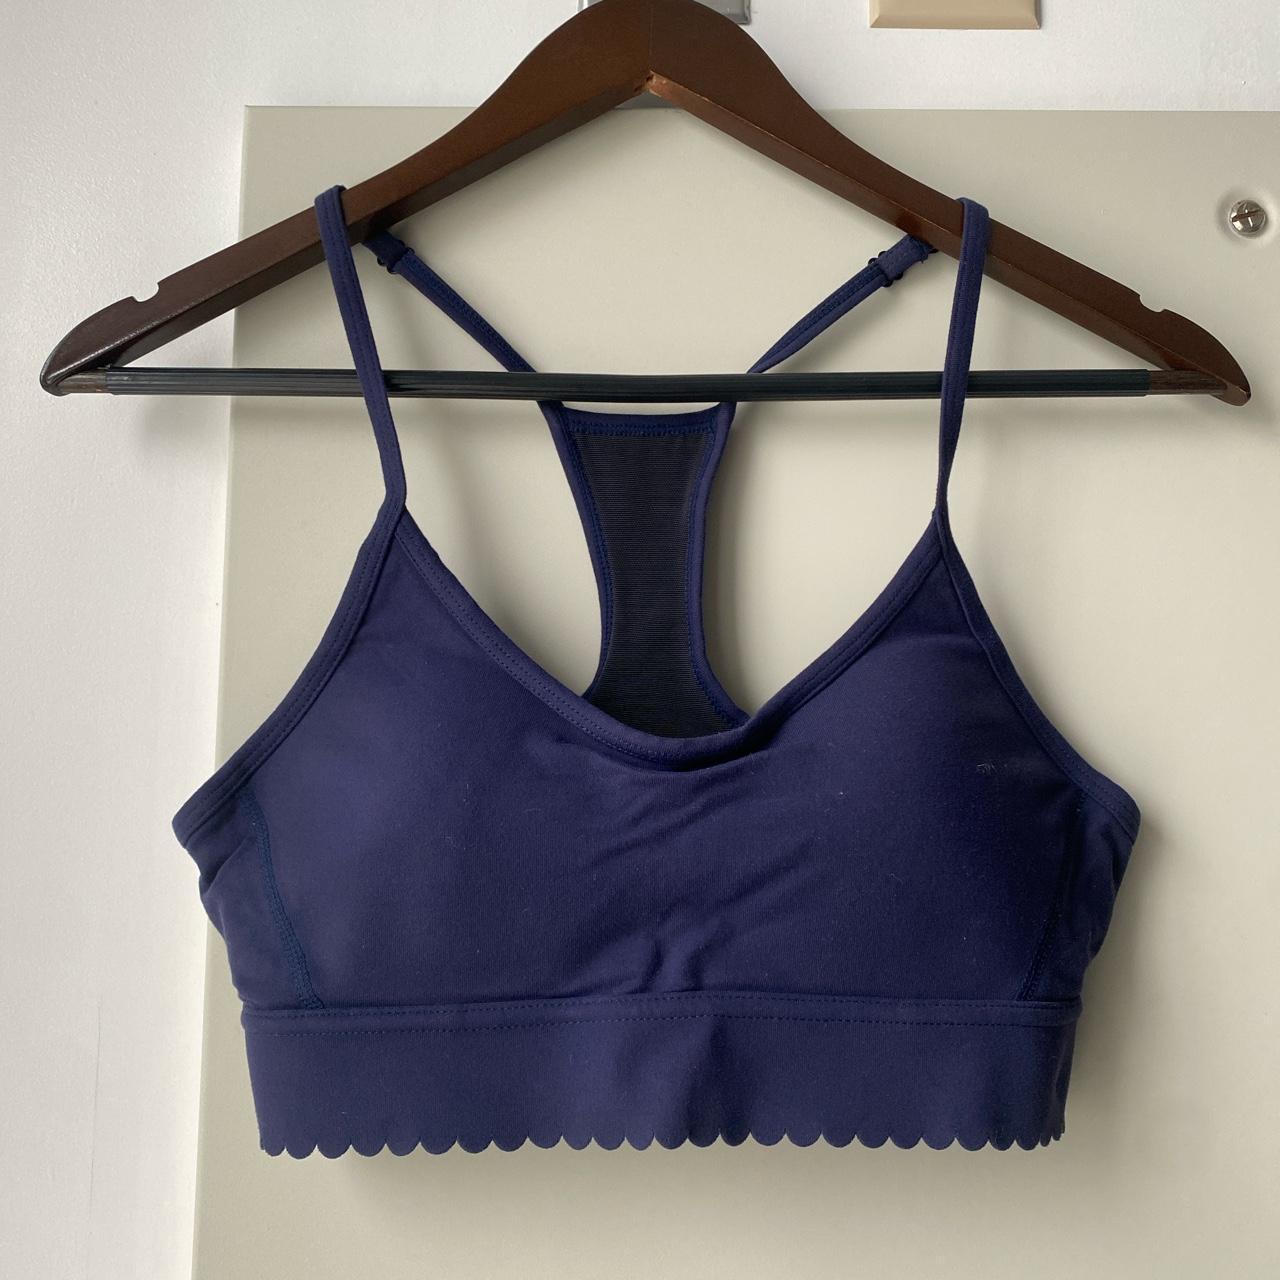 Small New Balance sports bra with scalloped edging - Depop